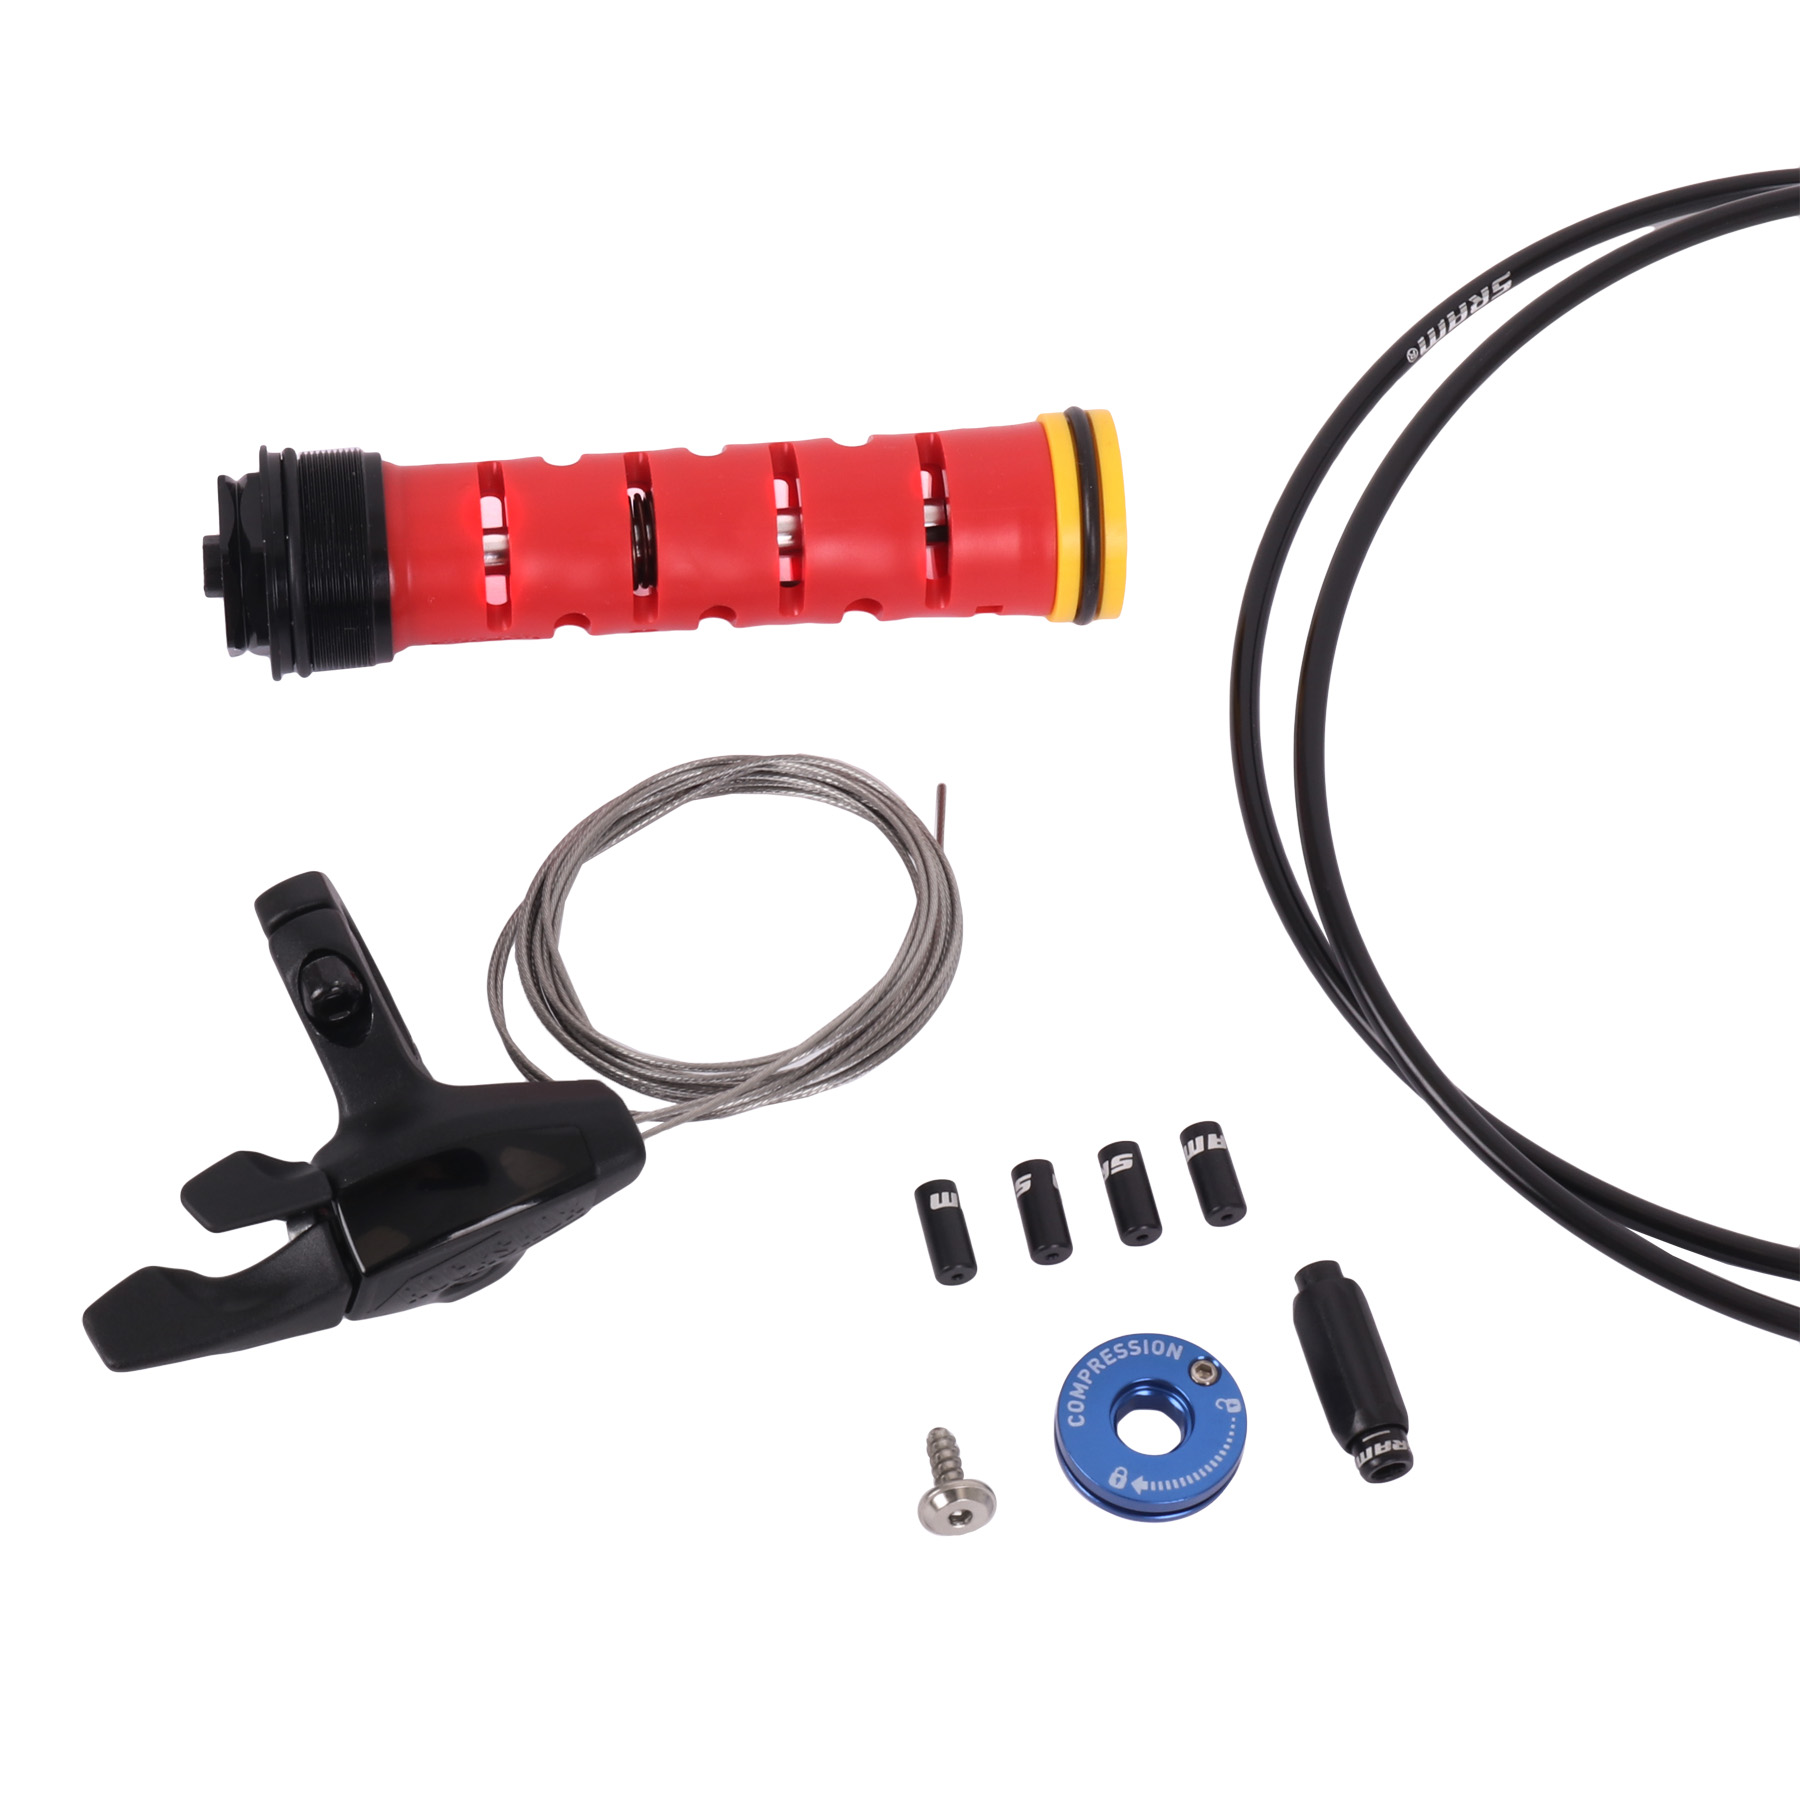 Picture of RockShox OneLoc Remote Upgrade Kit for Recon Silver B1 / Sektor Silver Boost from 2017 - 00.4318.002.015